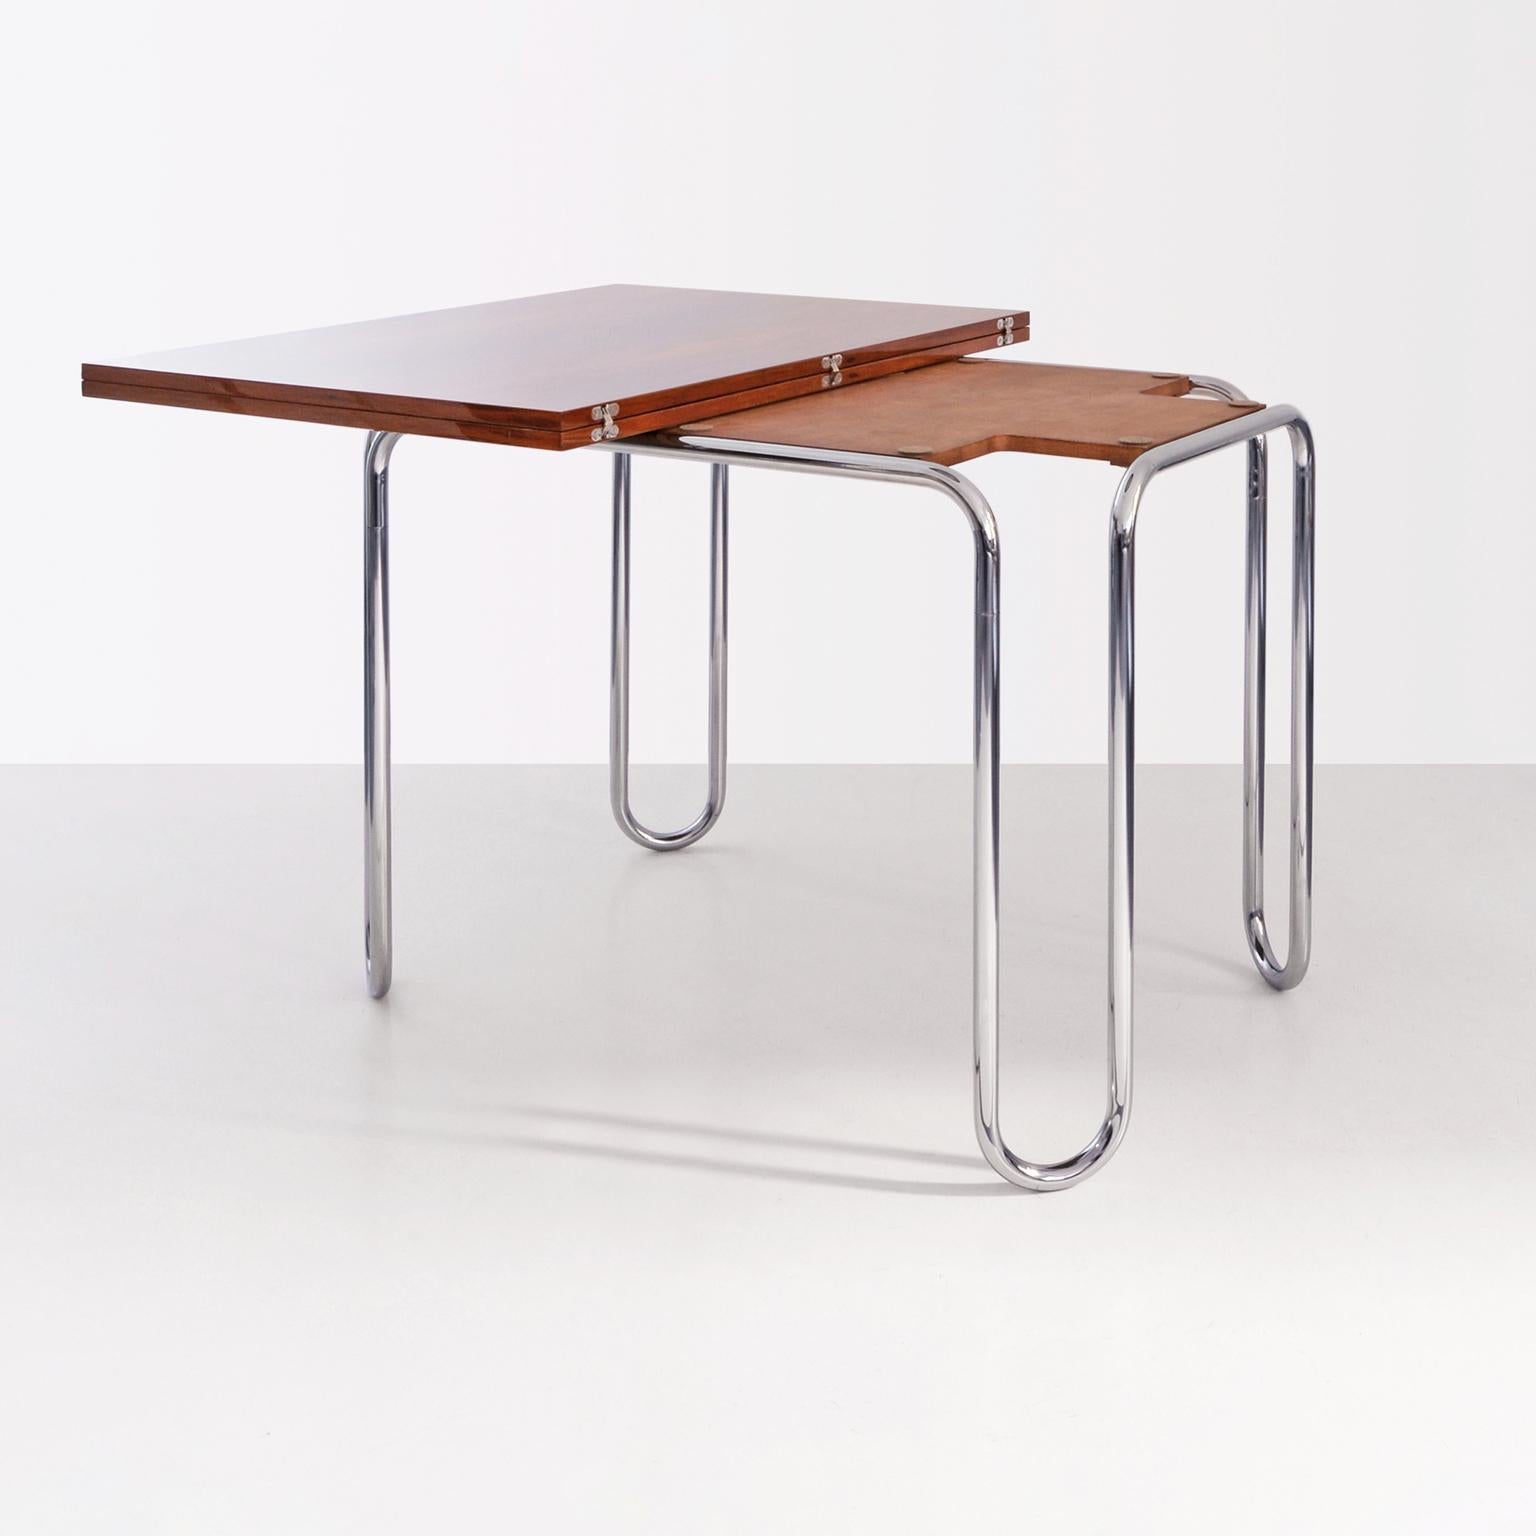 German Modernist Folding Table, Chrome Plated Steel, Veneered Wood, Made-To-Measure For Sale